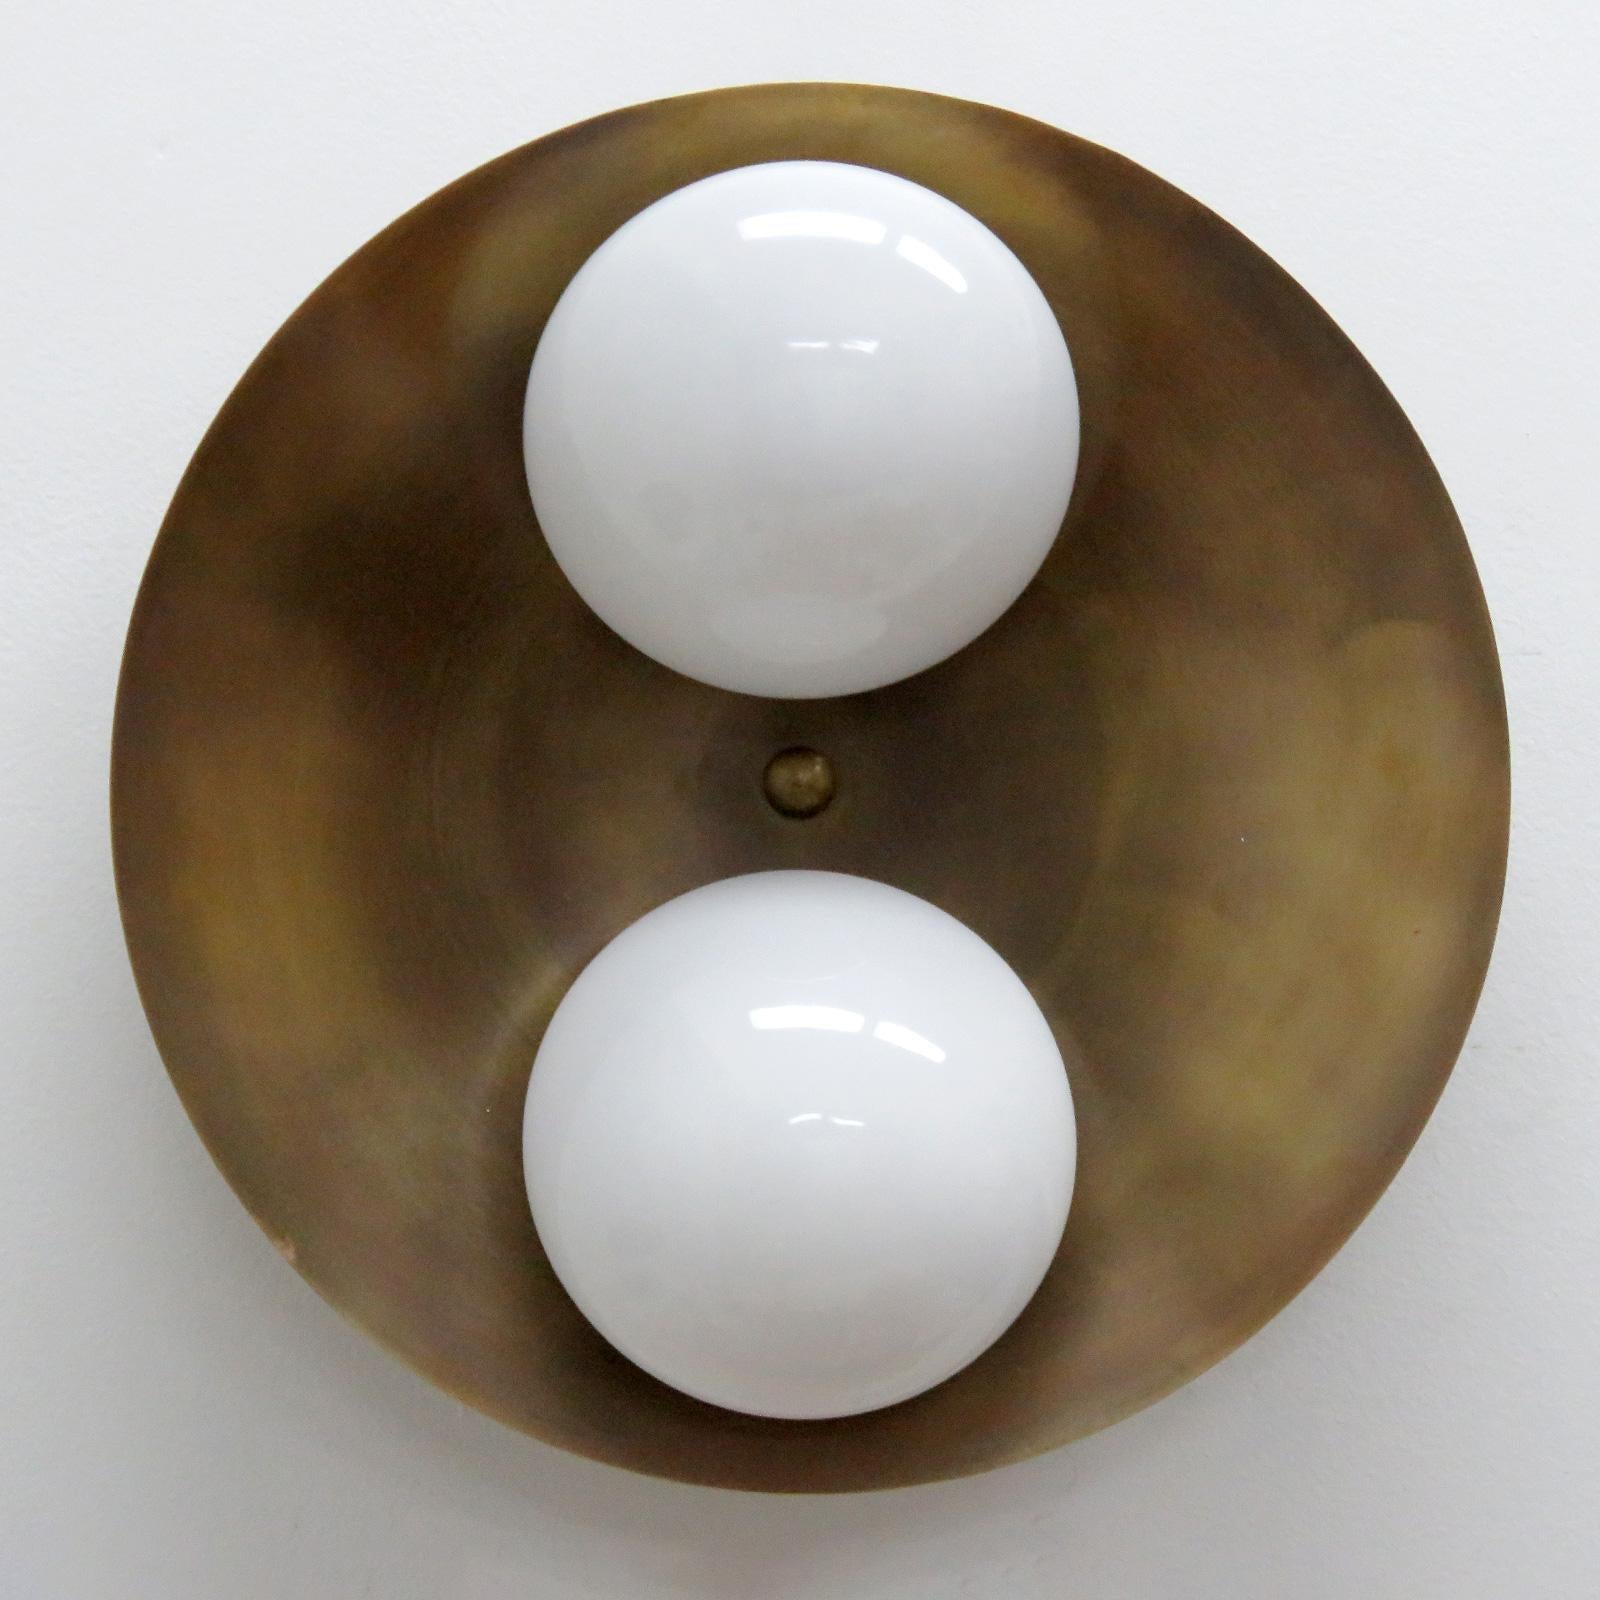 Elegant custom 'Binova' wall or ceiling light designed by Gallery L7, with two opaline glass shades on a patinated raw brass disc. Two E26 sockets per fixture, max. wattage 60w each, wired for US standards or European standards (110v/220v), UL